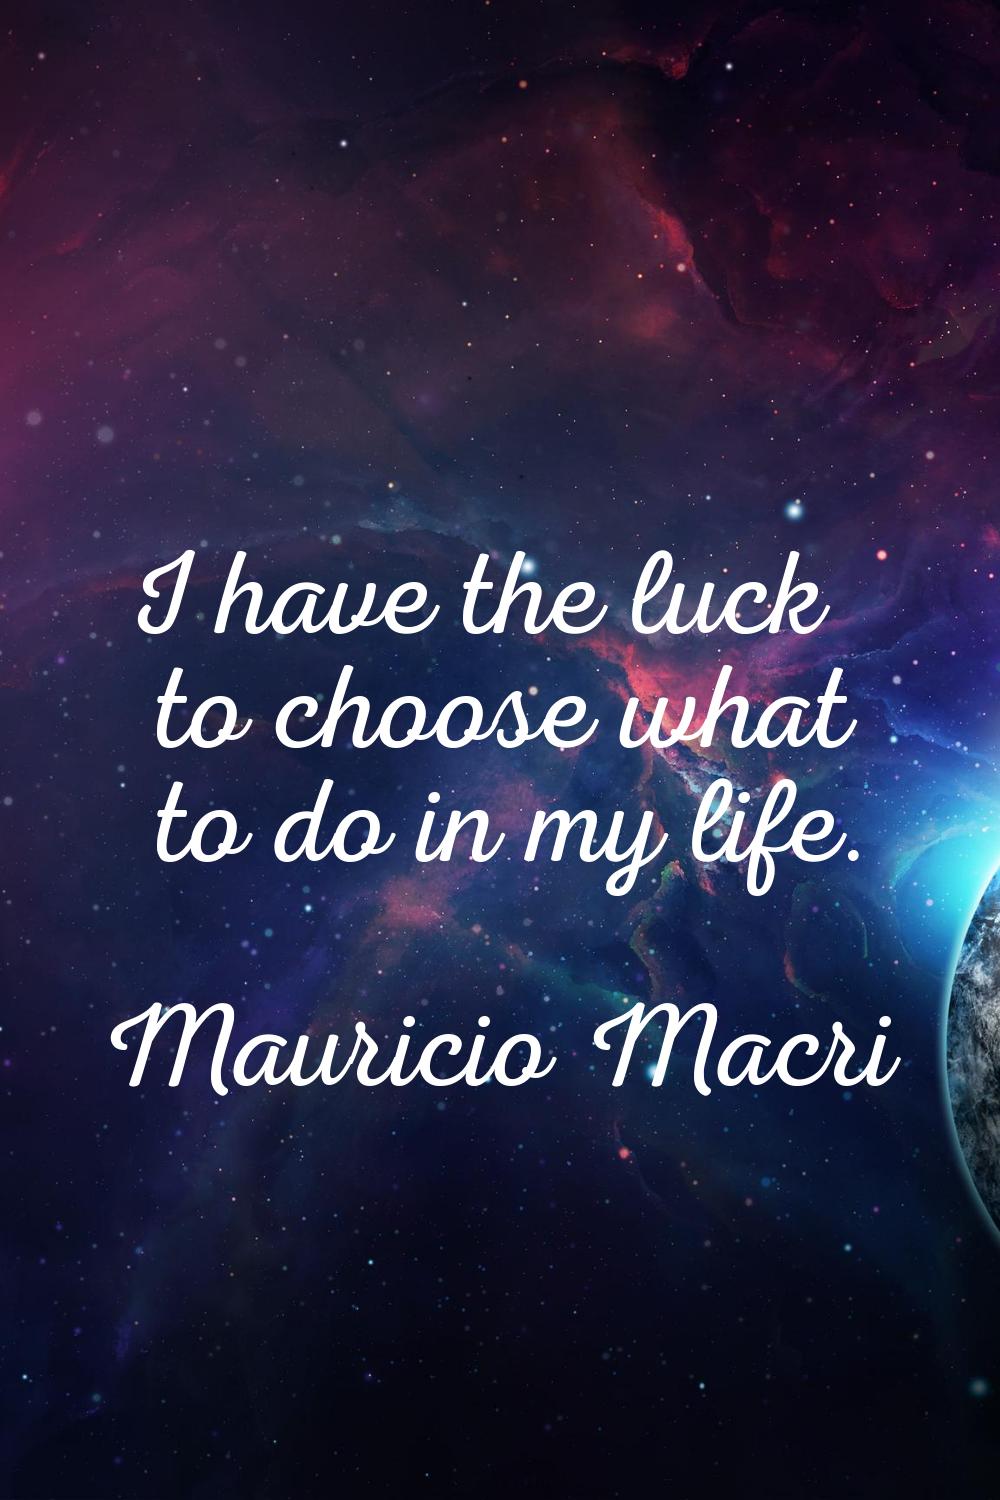 I have the luck to choose what to do in my life.